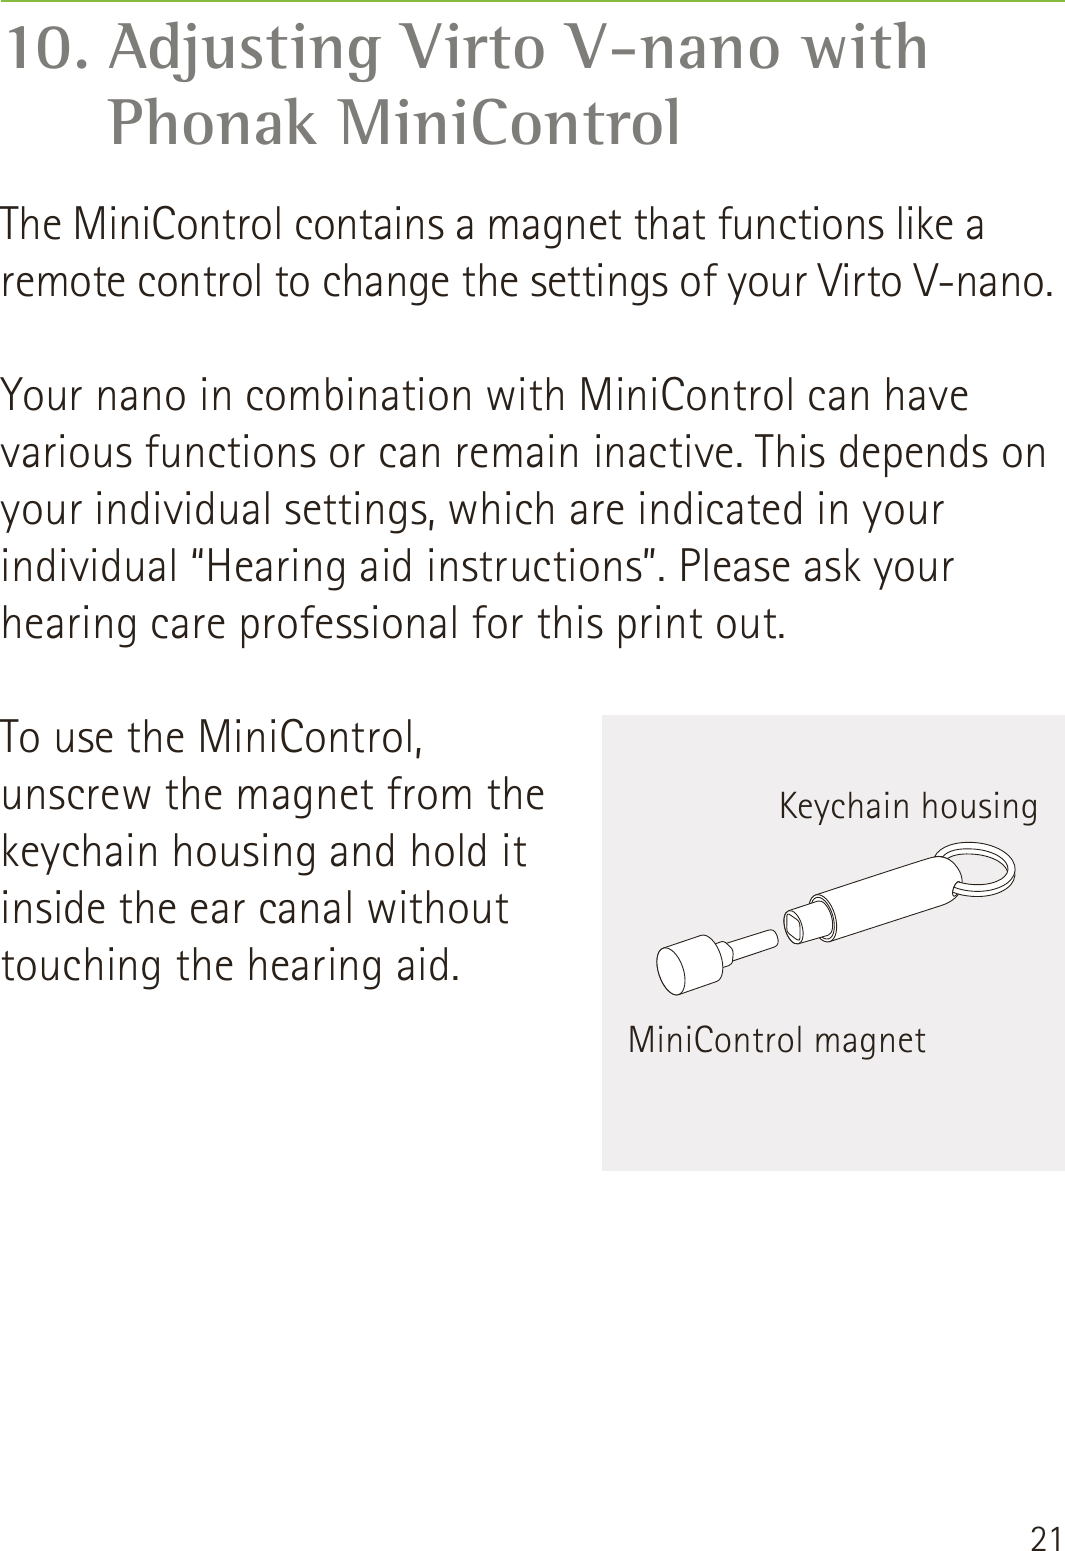 2110. Adjusting Virto V-nano with  Phonak MiniControlThe MiniControl contains a magnet that functions like a remote control to change the settings of your Virto V-nano.Your nano in combination with MiniControl can have various functions or can remain inactive. This depends on your individual settings, which are indicated in your individual “Hearing aid instructions”. Please ask your hearing care professional for this print out.To use the MiniControl, unscrew the magnet from the keychain housing and hold it inside the ear canal without touching the hearing aid.MiniControl magnetKeychain housing